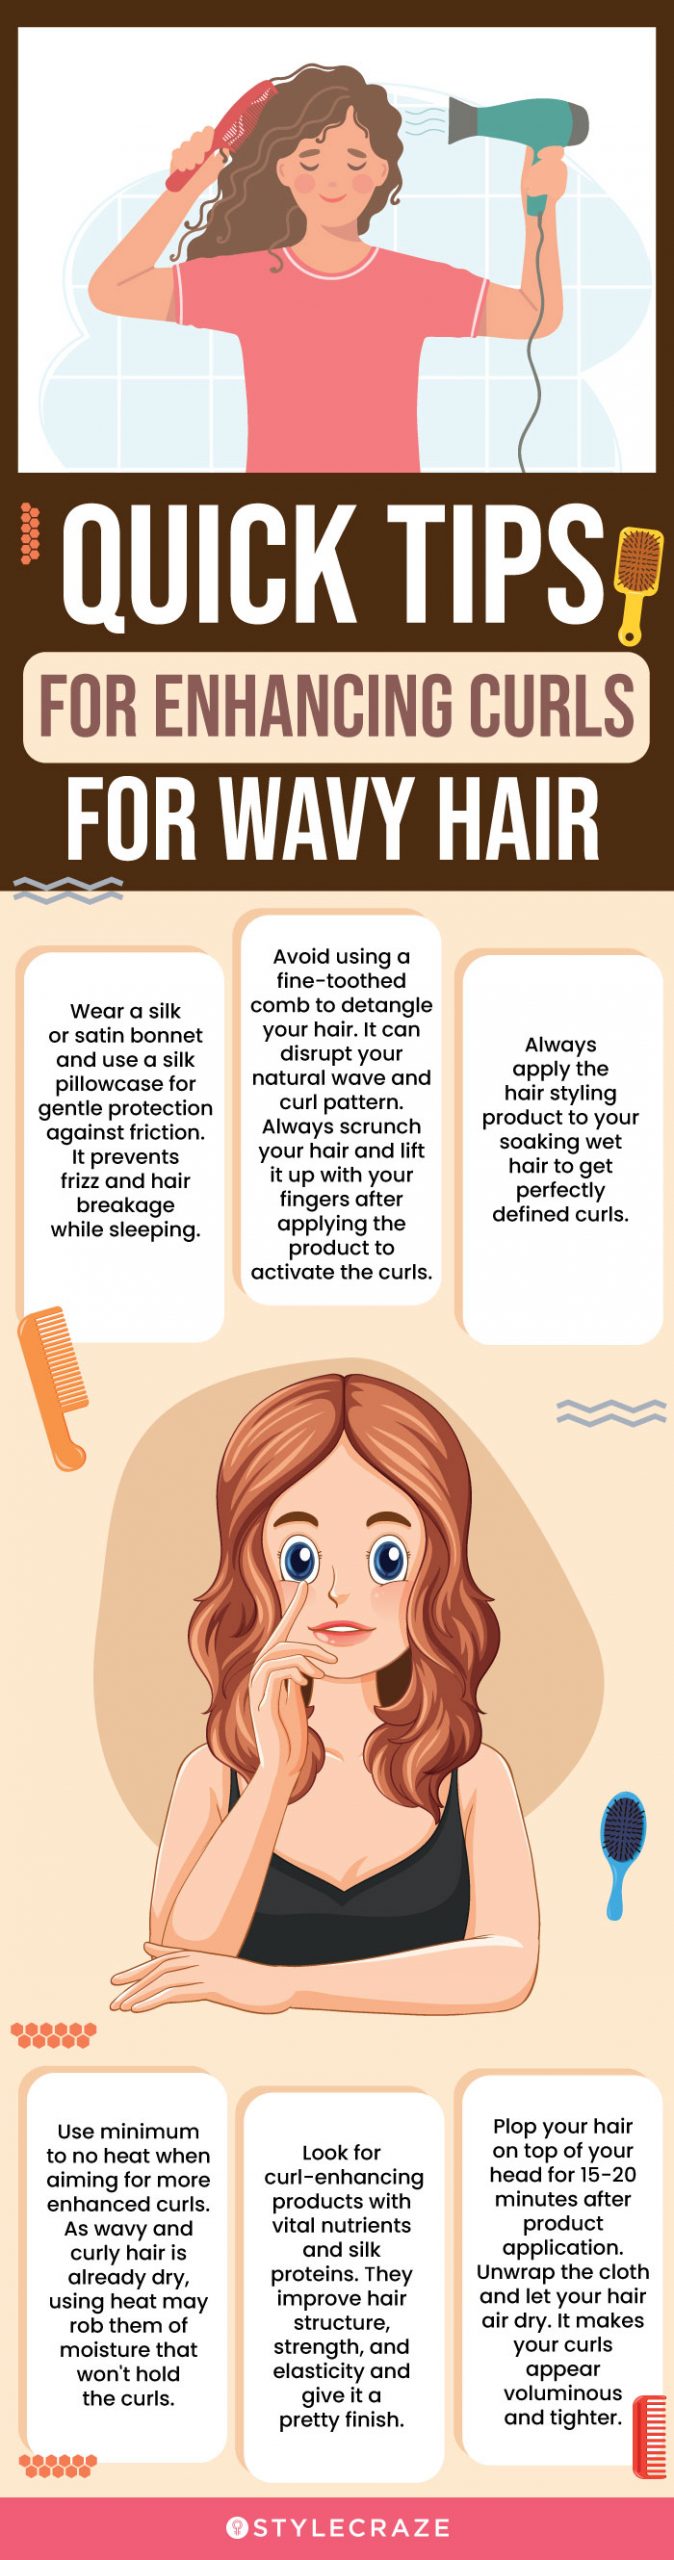 Quick Tips For Enhancing Curls For Wavy Hair(infographic)